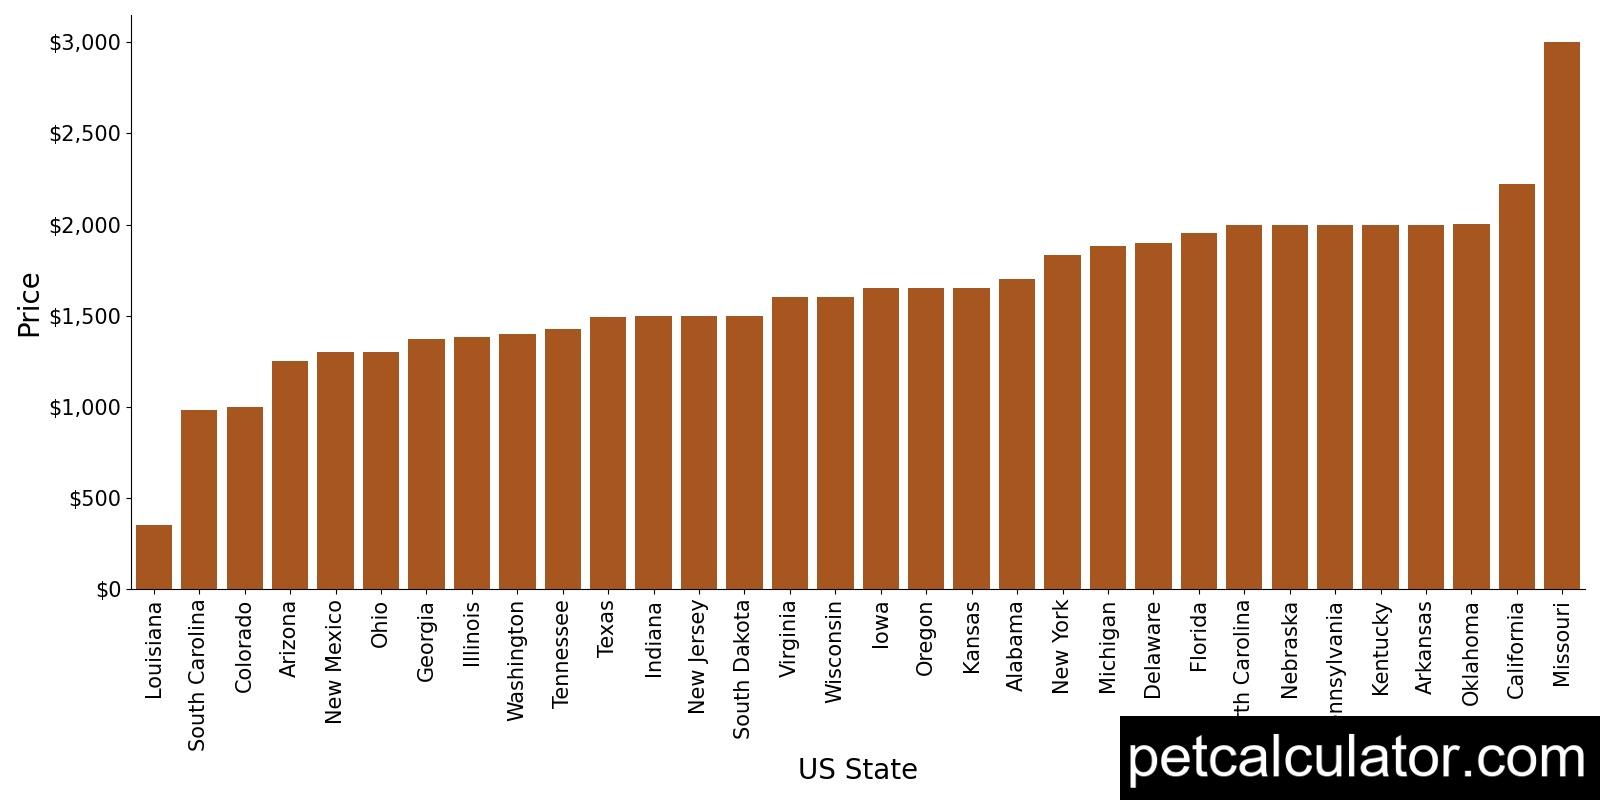 Price of Bull Terrier by US State 